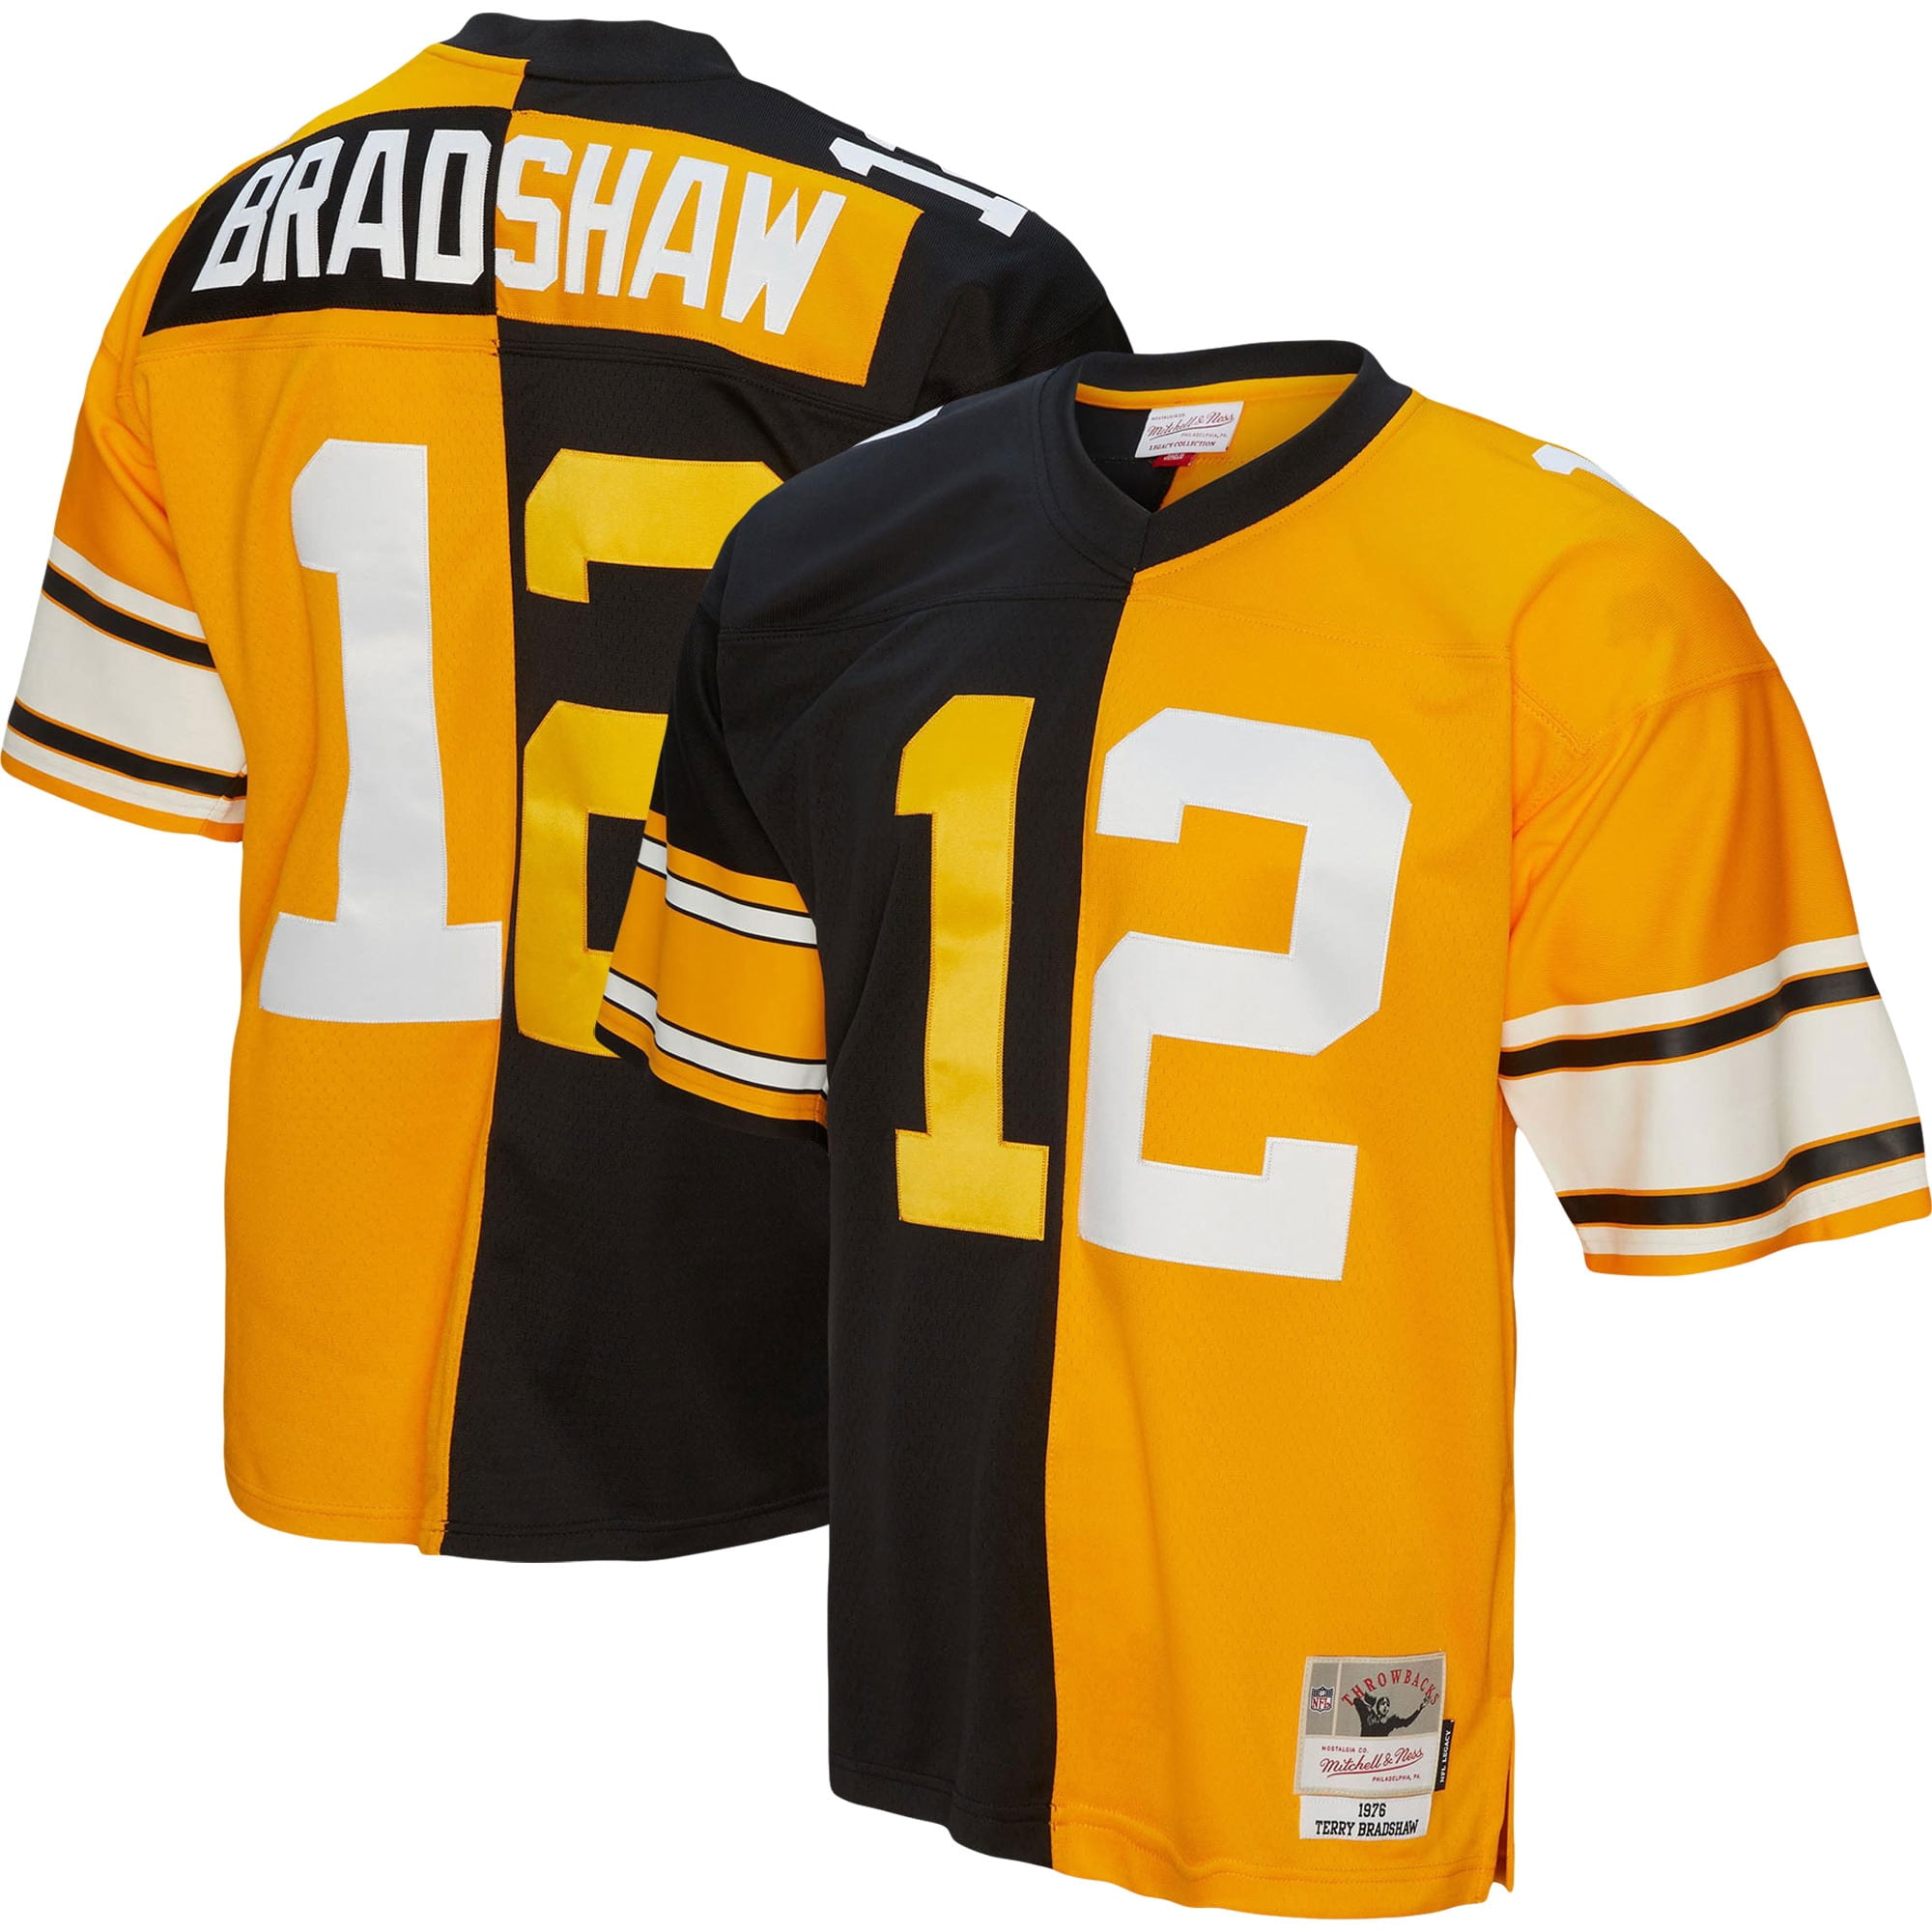 Terry Bradshaw Back Signed Pittsburgh Steelers Jersey